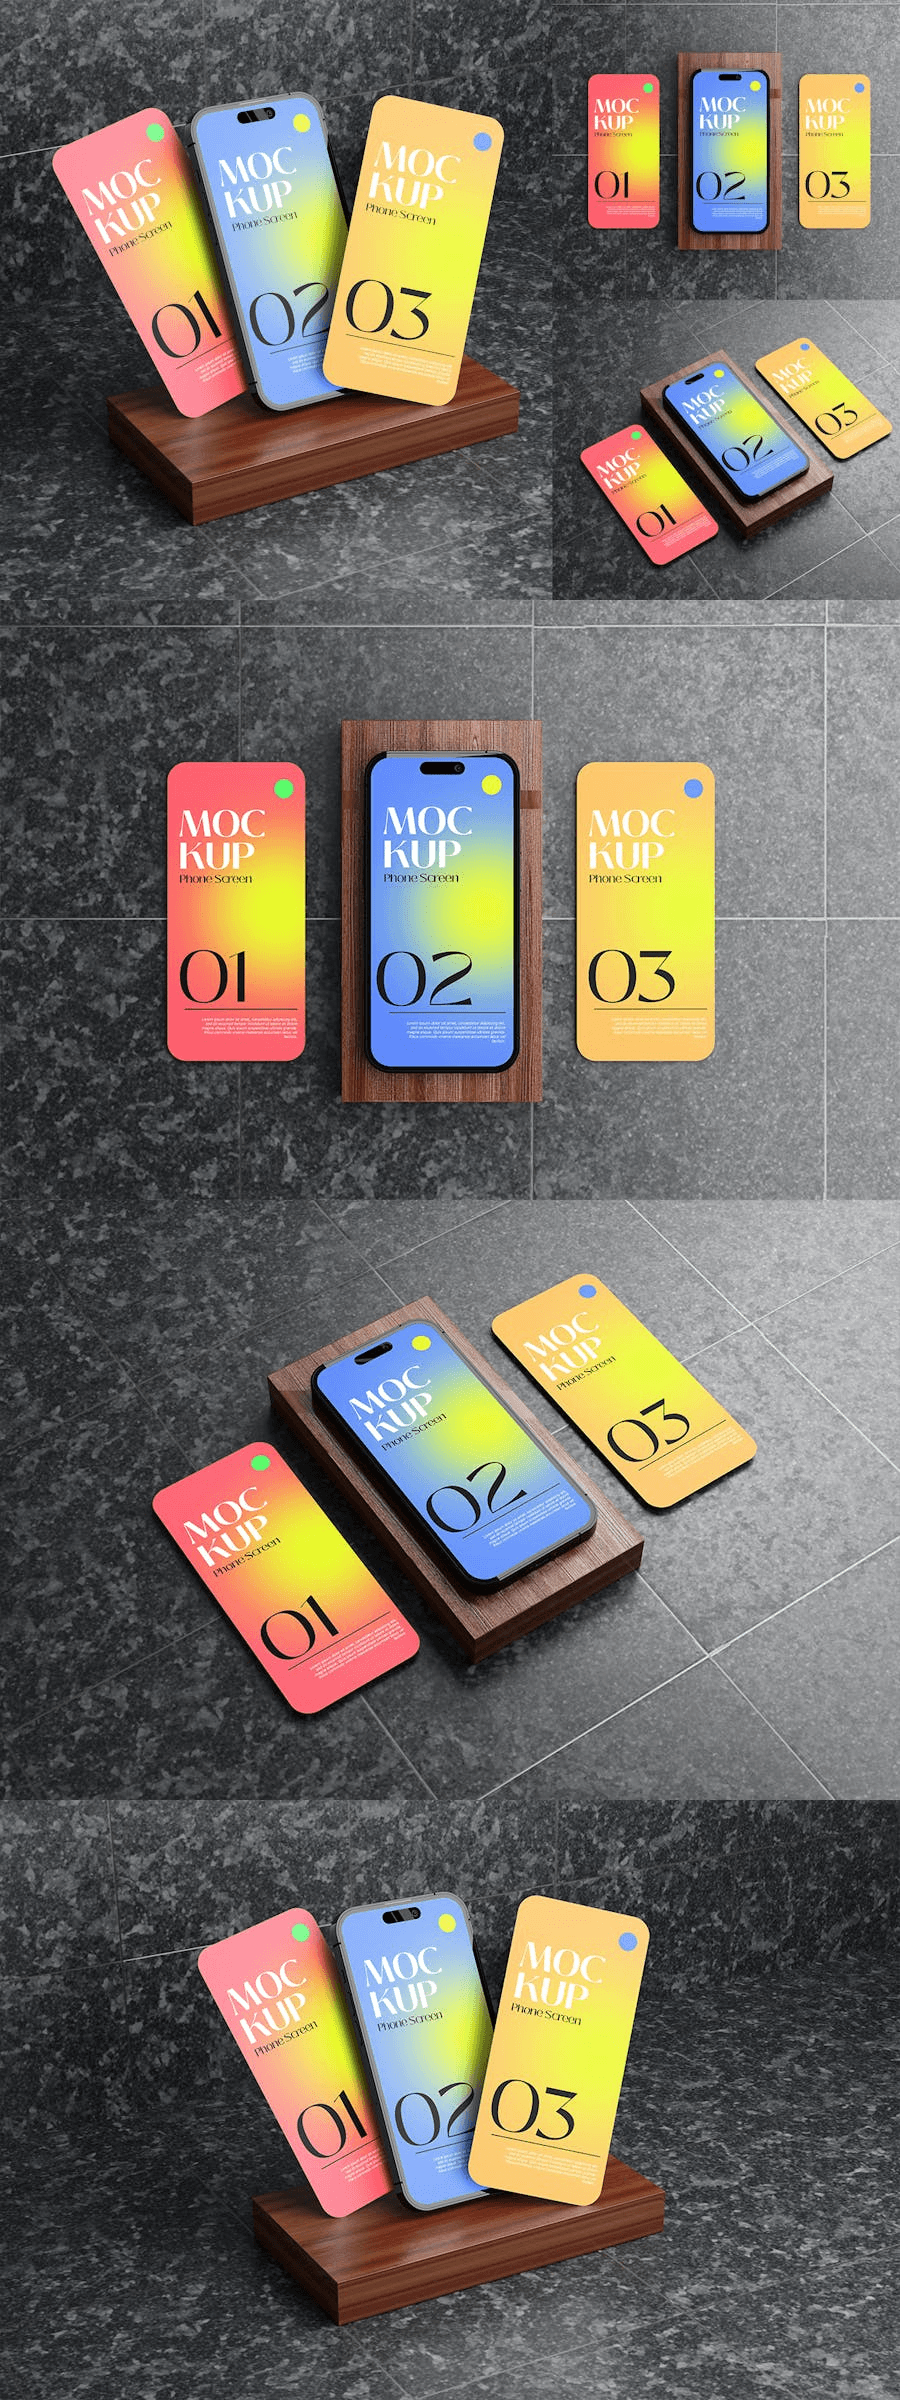 device Mockup iphone apple mobile Display screen Technology phone smartphone